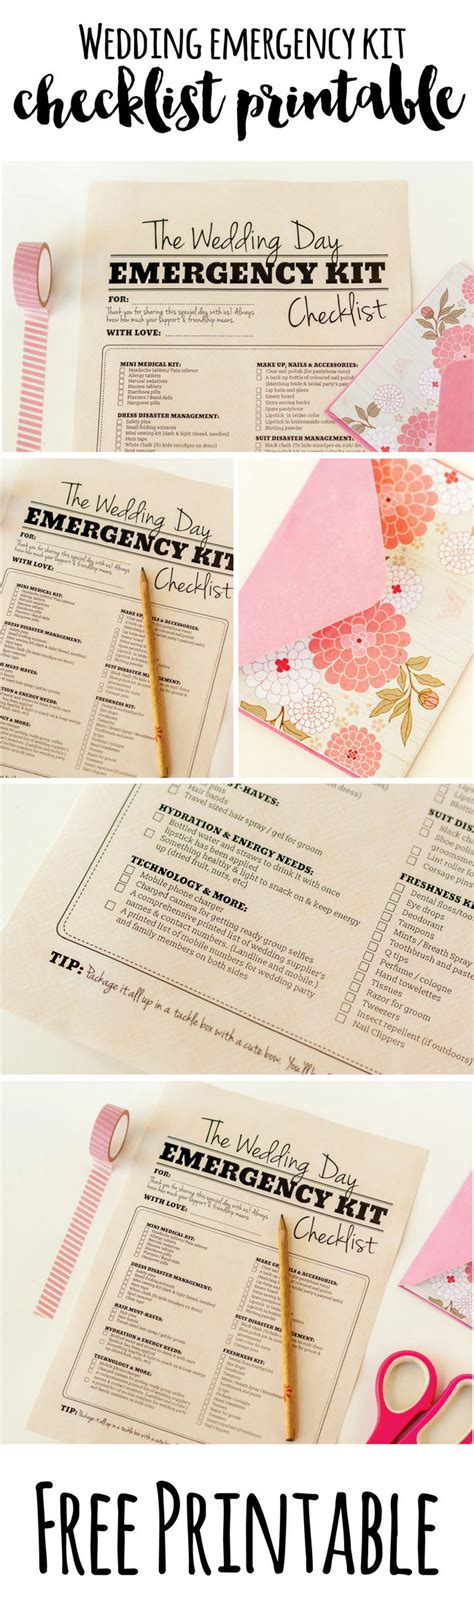 Free printable emergency wedding day checklist lists everything you should pack on your wedding day. Wedding Day Emergency Kit Checklist {Free Printable}